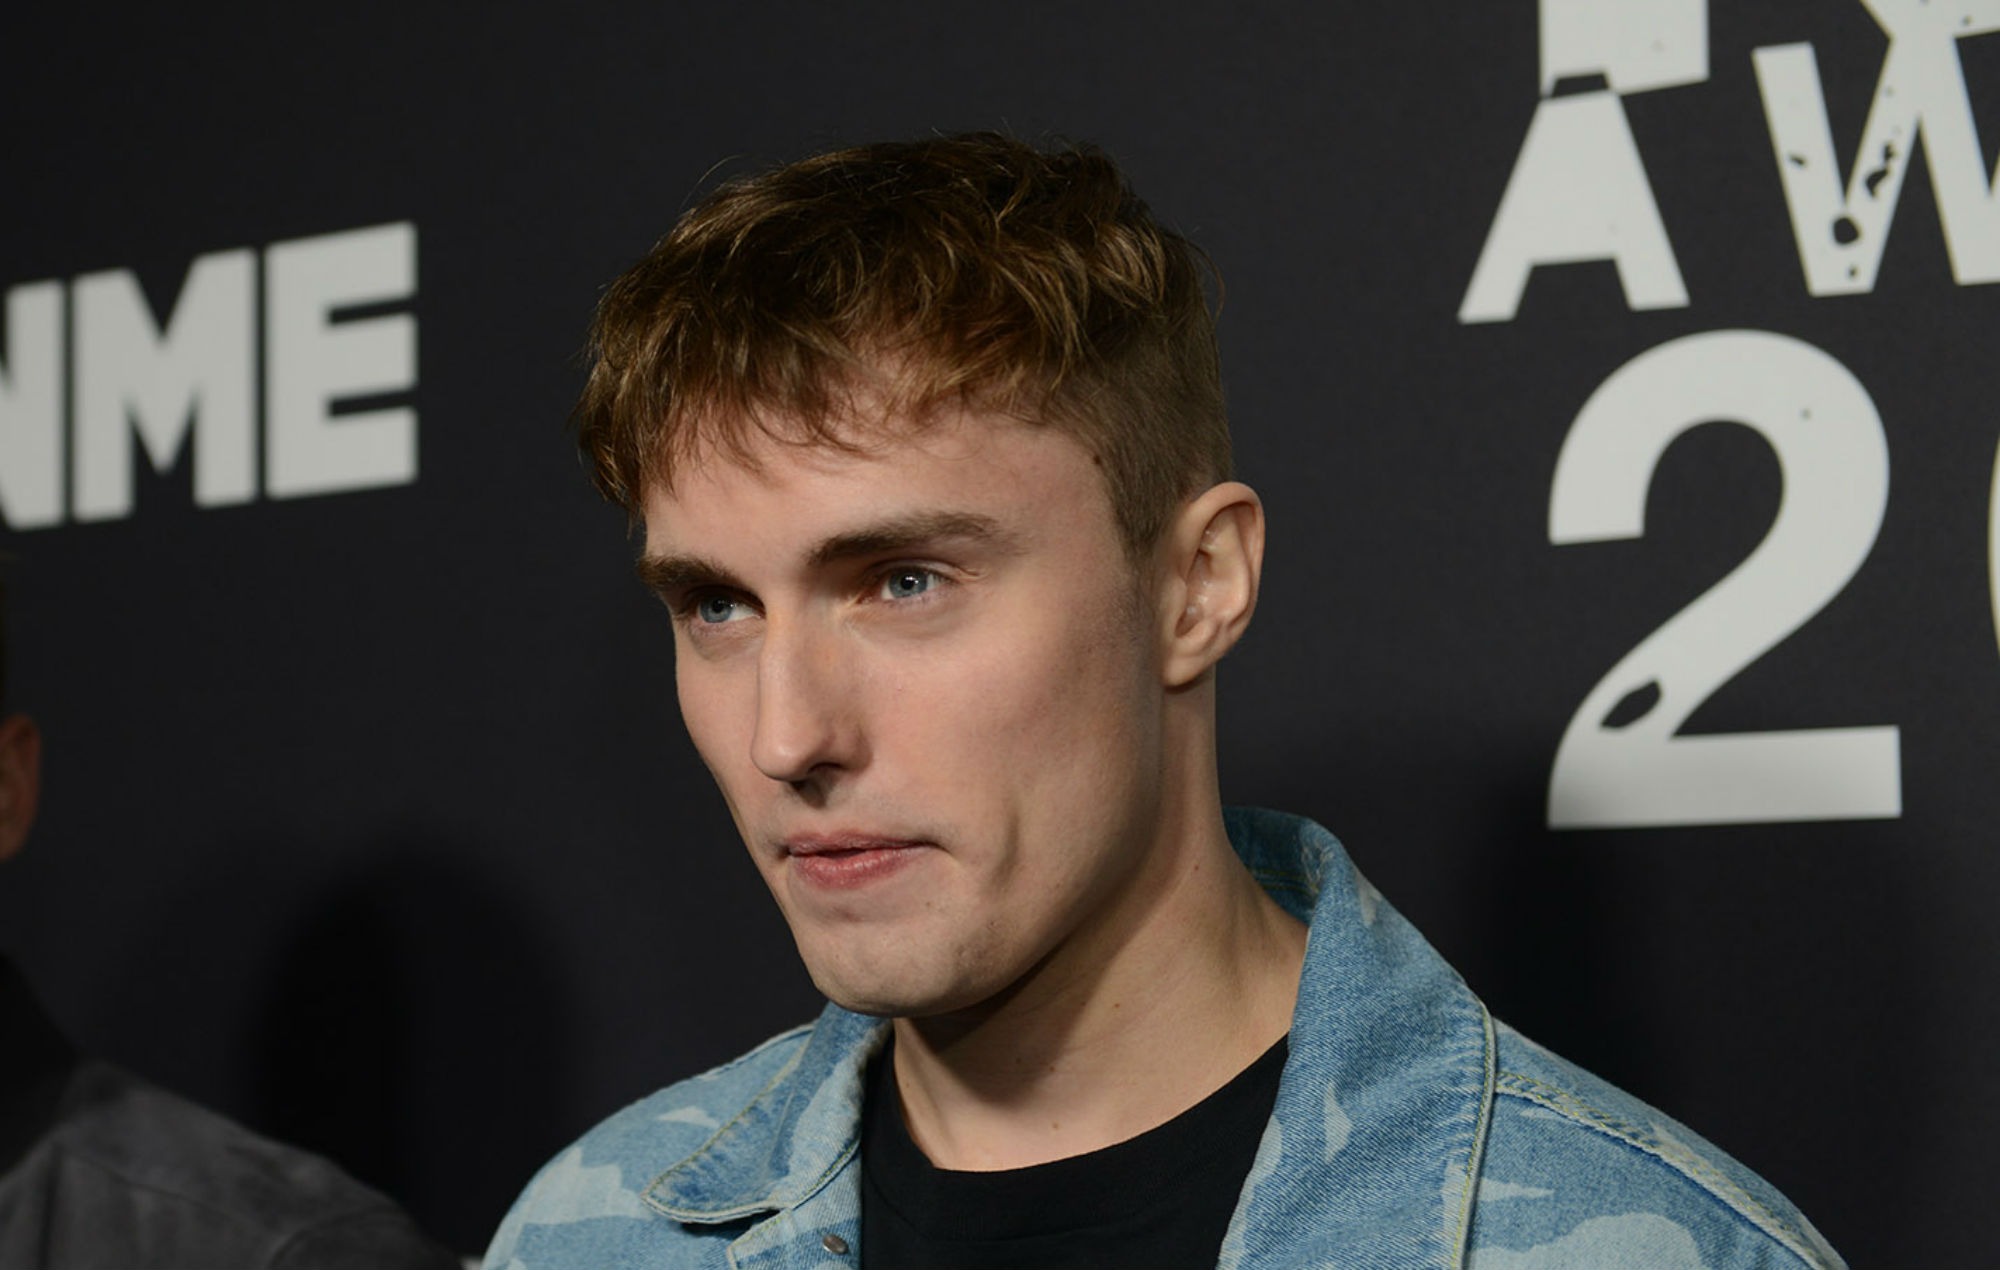 Sam Fender says he’s finished writing his next album